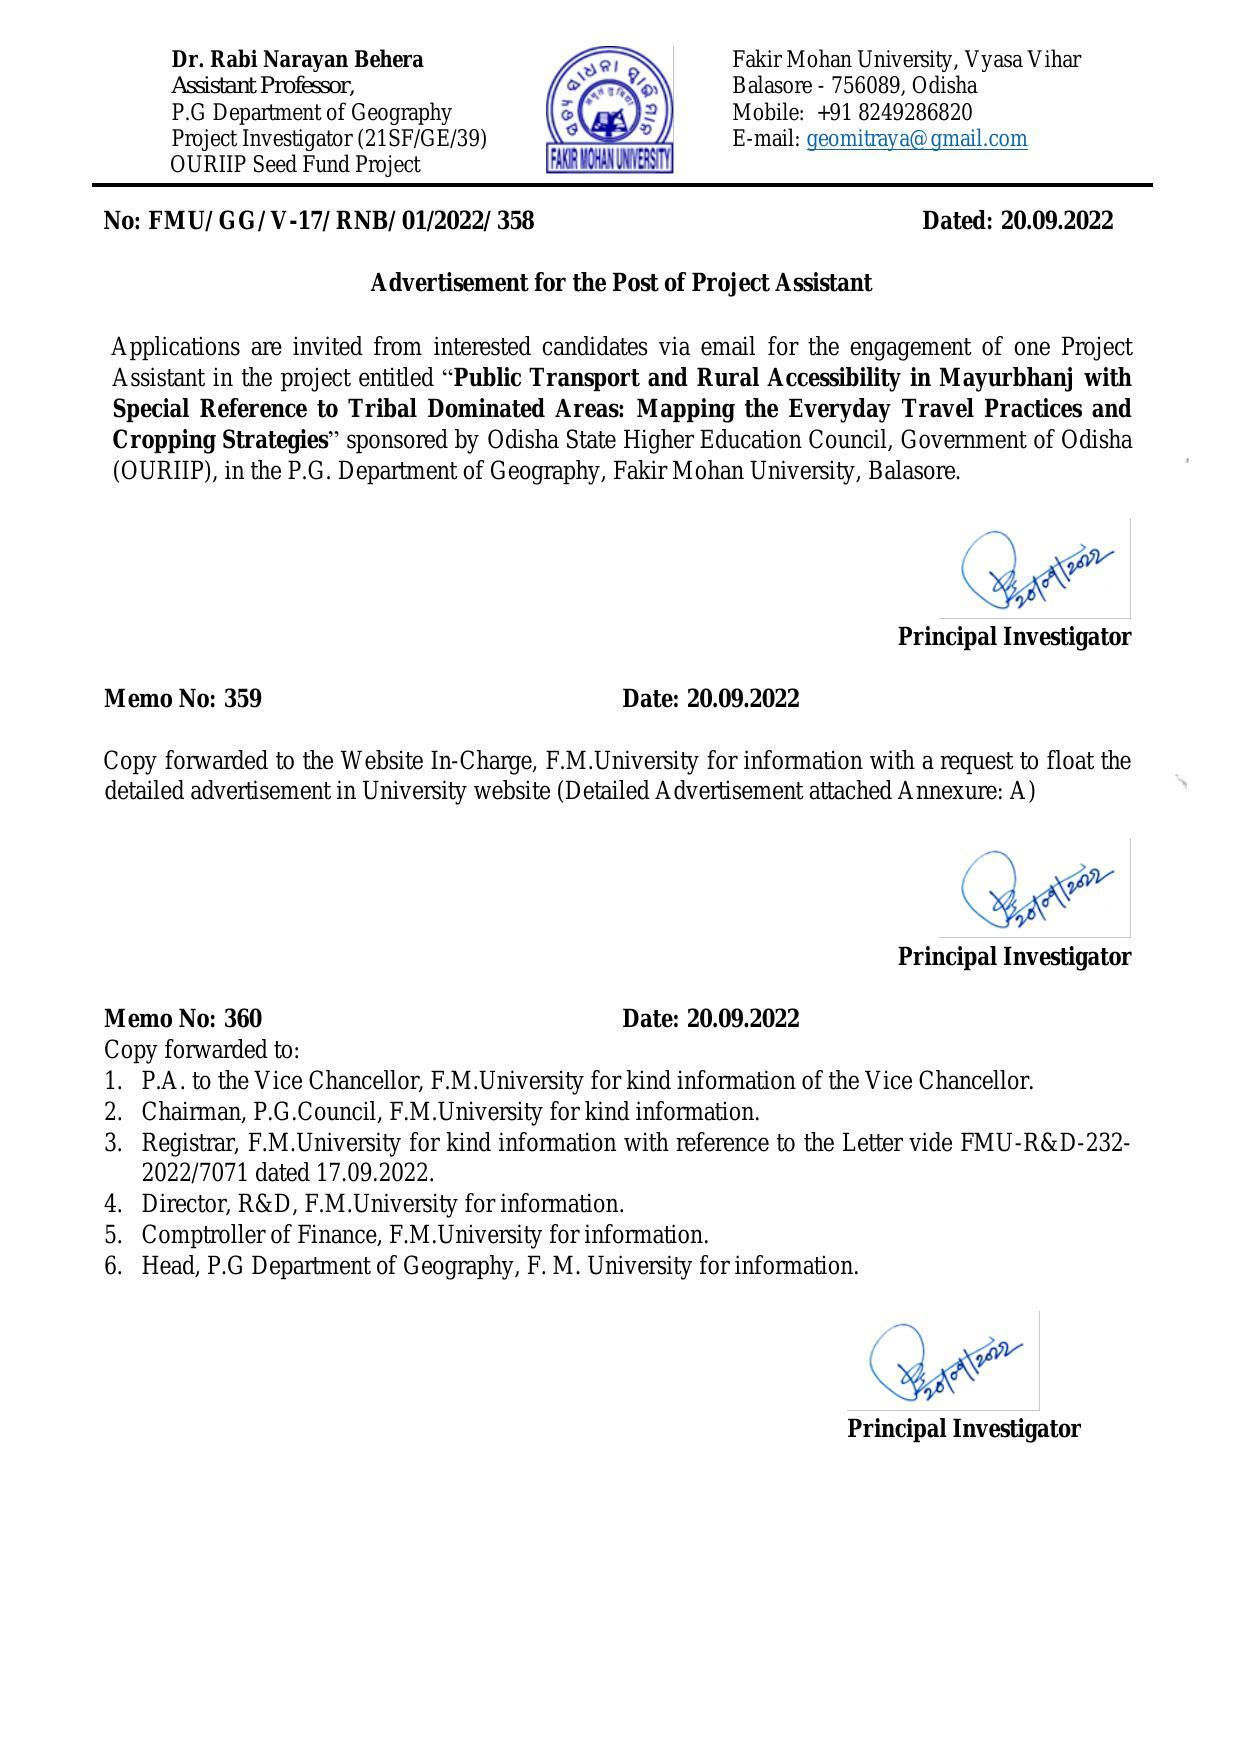 Fakir Mohan University Invites Application for Project Assistant (PA) Recruitment 2022 - Page 3